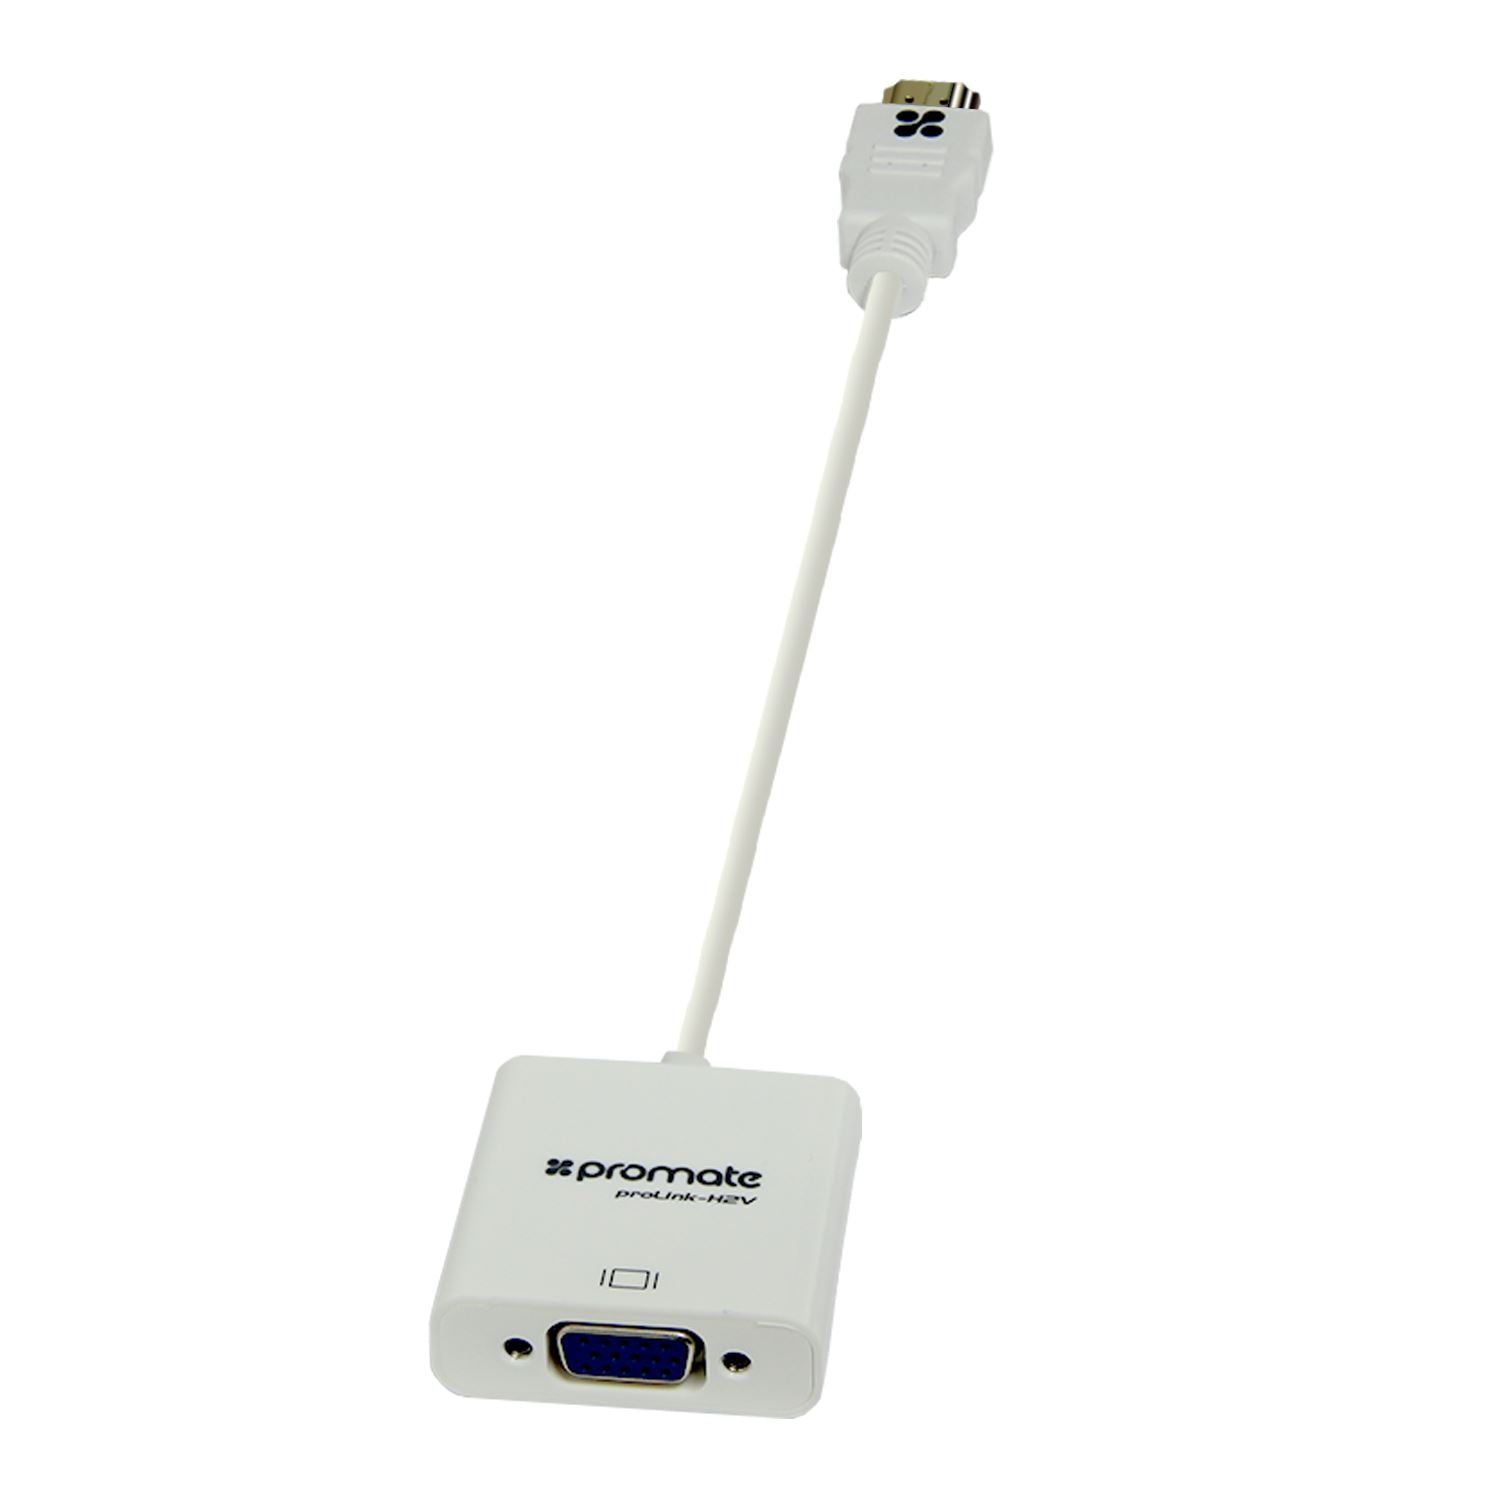 PROMATE_HDMI_(Male)_to_VGA_(Female)_Display_Adaptor_Kit._Supports_up_to_1920x1080@60Hz._Gold-Plated_HDMI_Connector._Supports_both_Windows_&_Mac._White_Colour. 1723